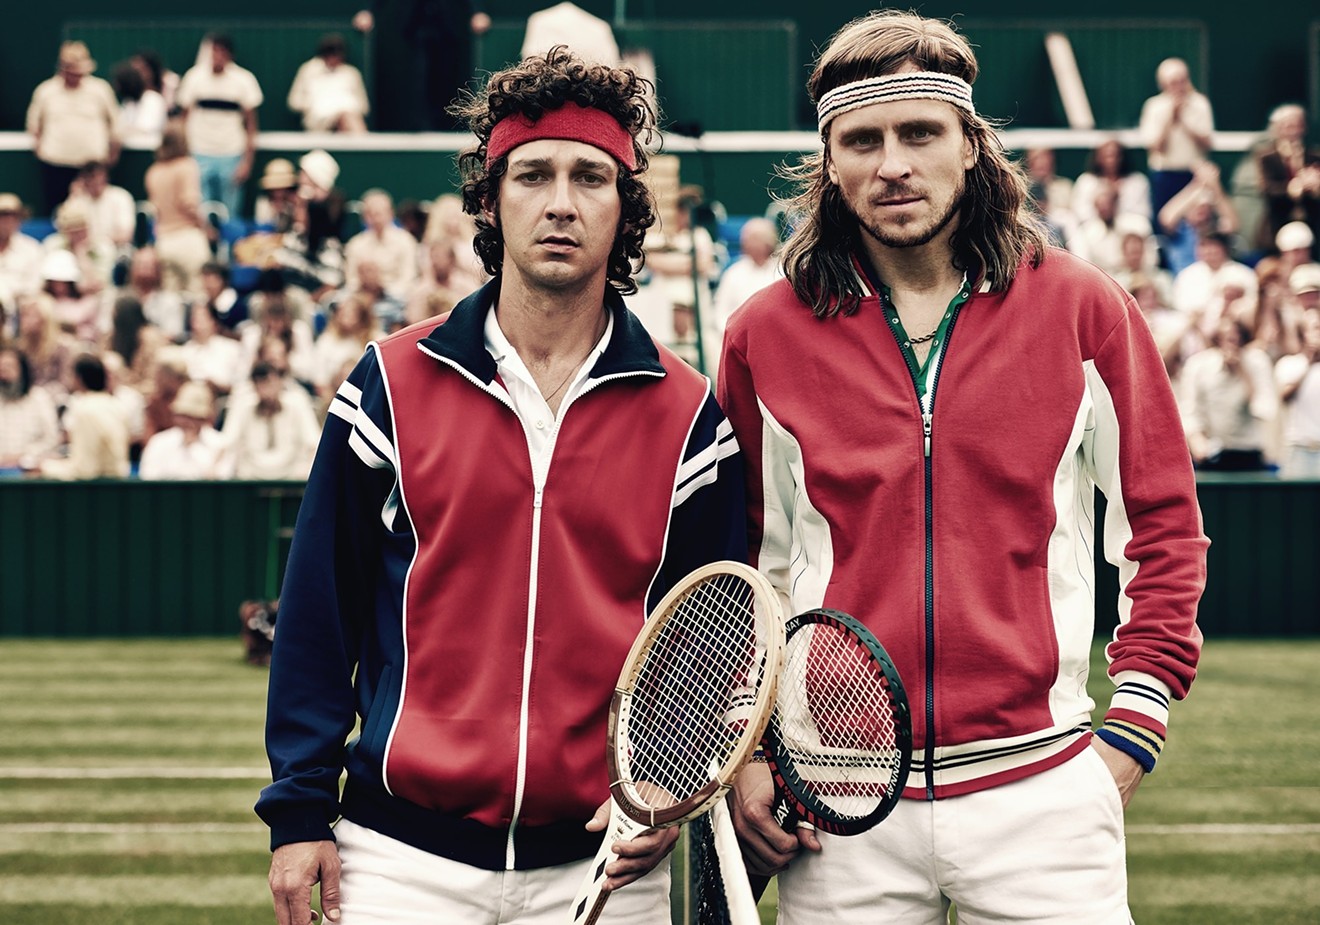 Shia LaBeouf (left) plays John McEnroe, the hotheaded,  filthy-mouthed tennis star, and Sverrir Gudnason is Bjorn Borg, the Swede looking to win his record-breaking fifth Wimbledon championship, in Janus Metz’s Borg vs. McEnroe.